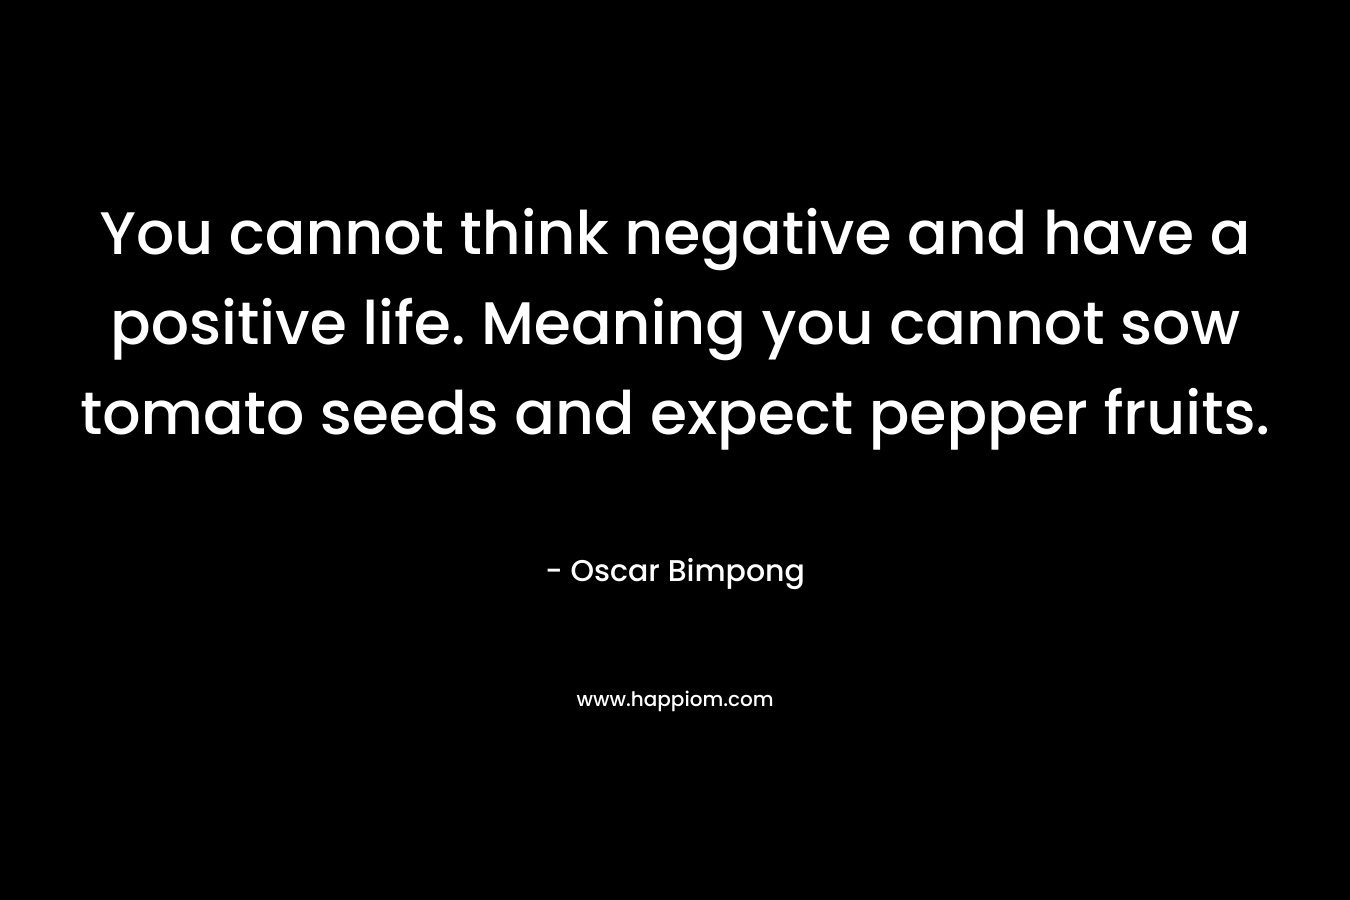 You cannot think negative and have a positive life. Meaning you cannot sow tomato seeds and expect pepper fruits.